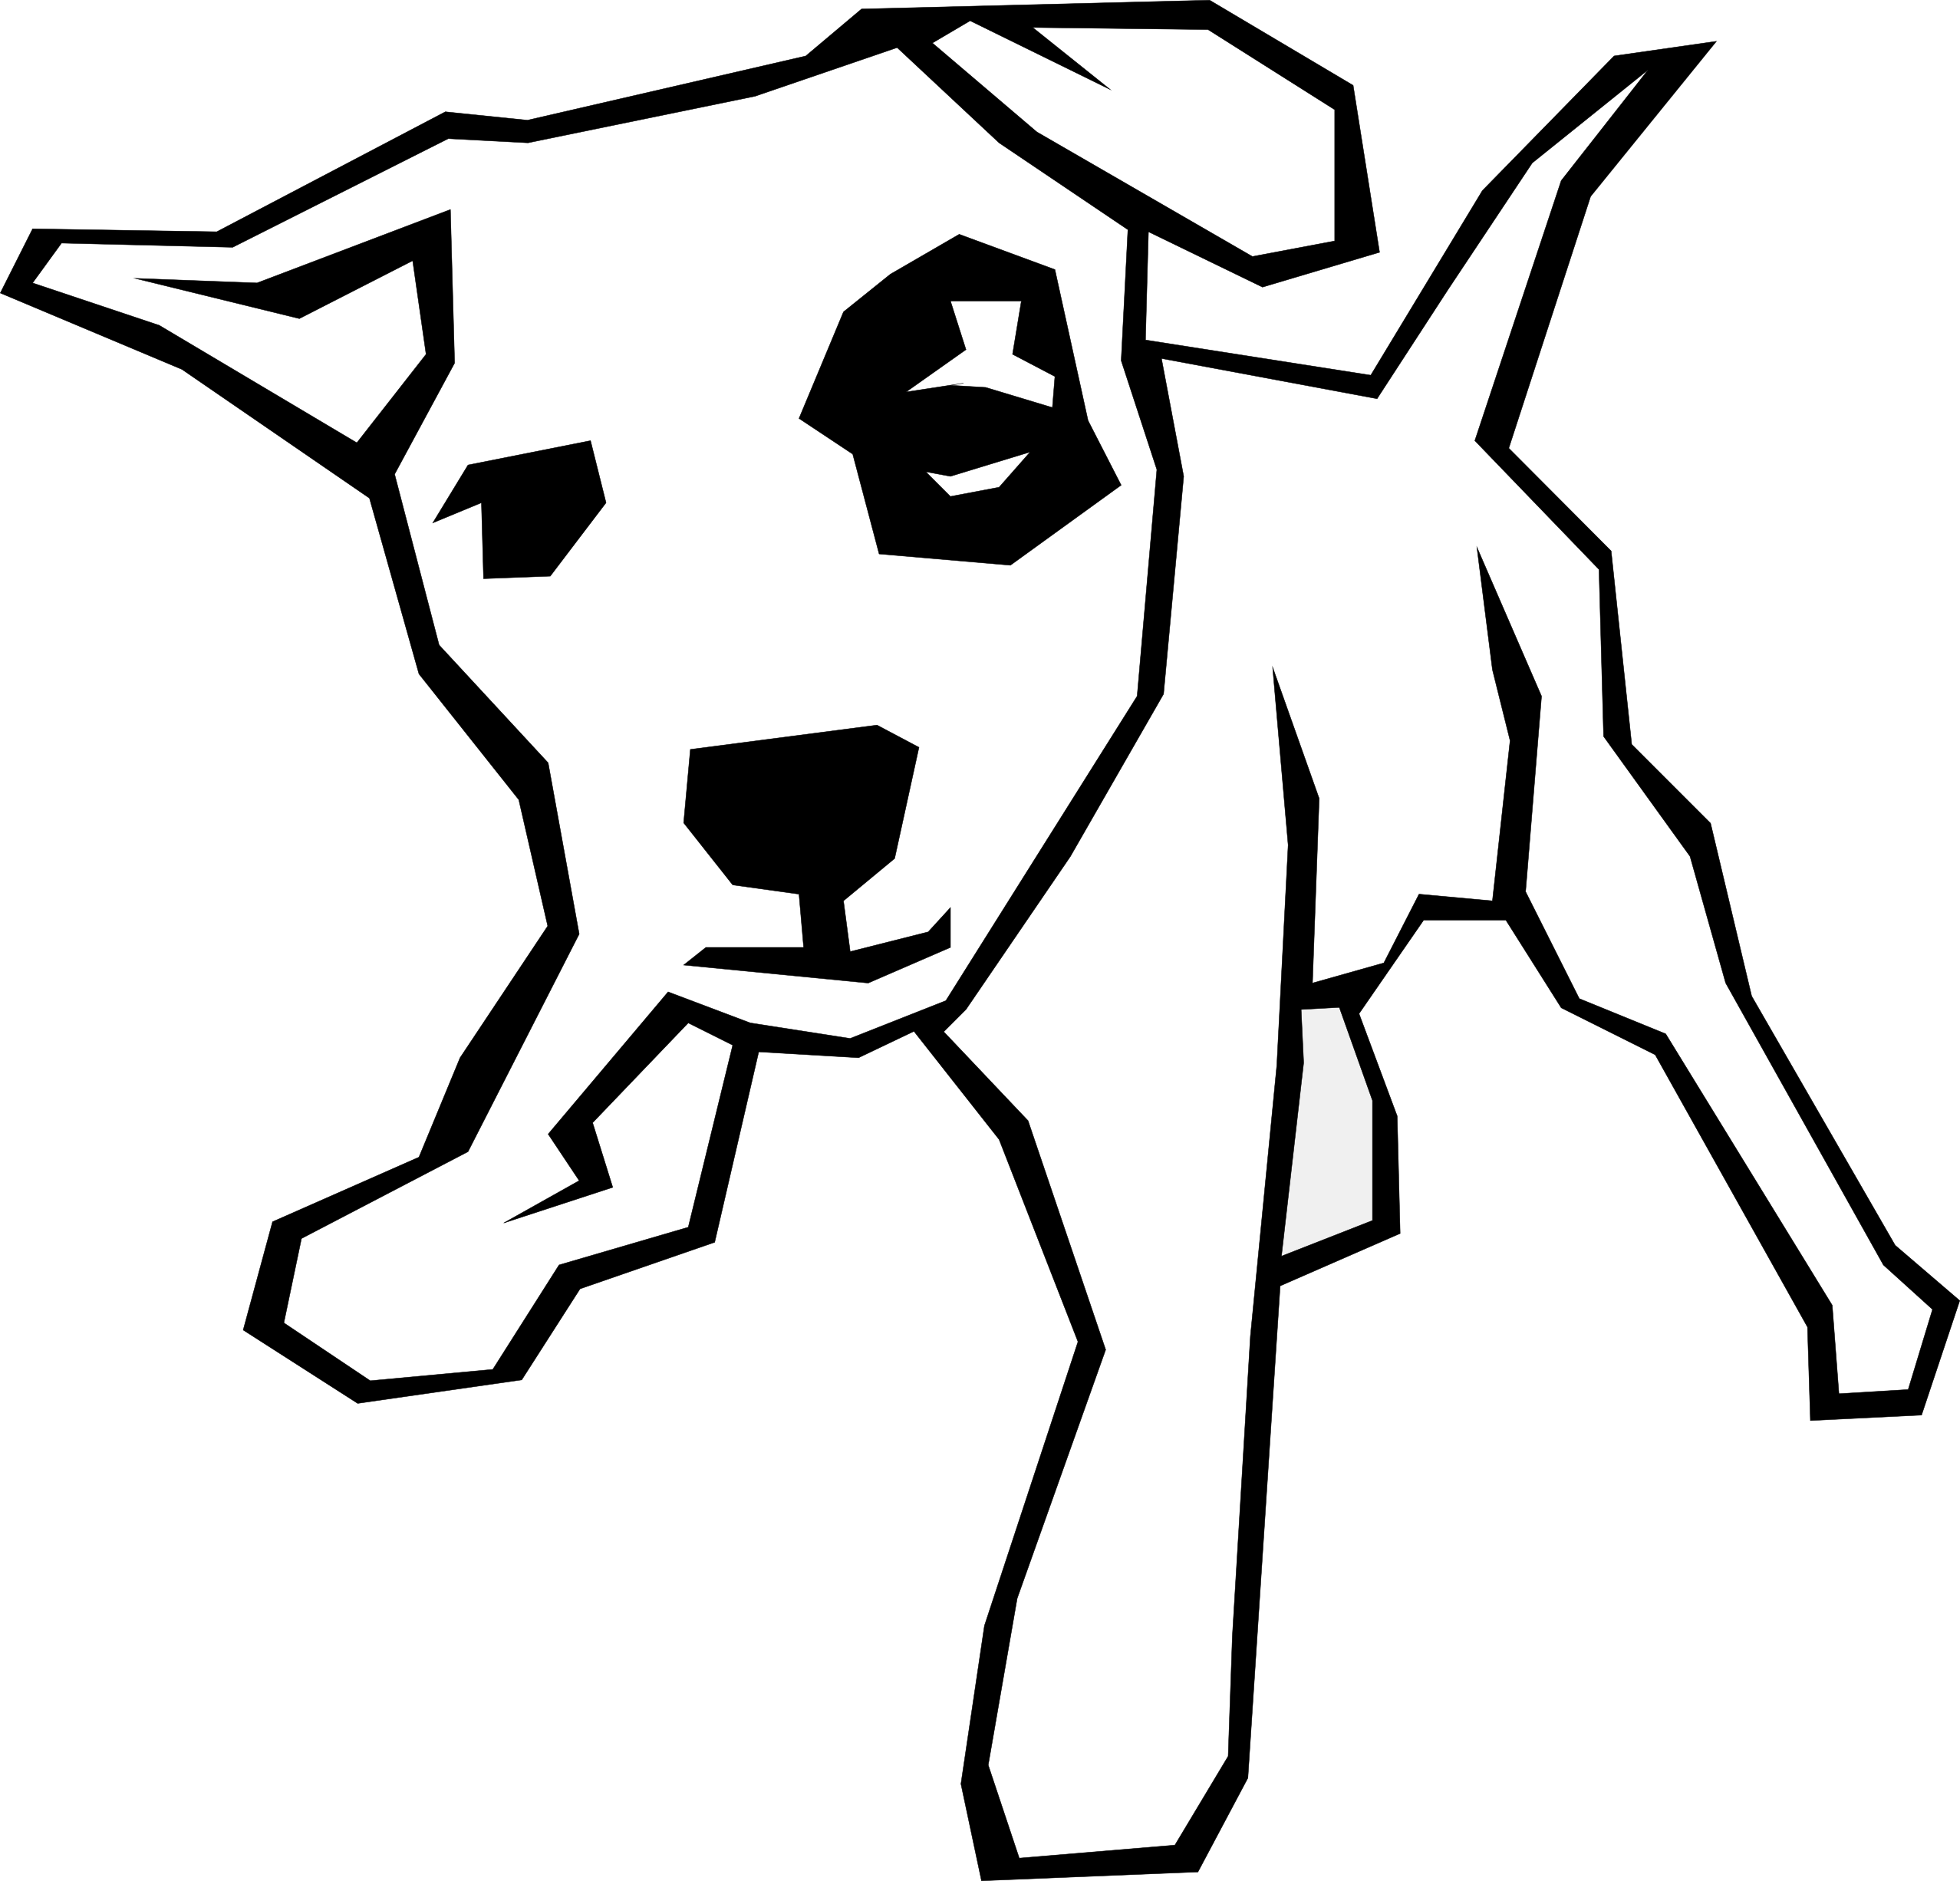 Line Drawings Of Dog - Clipart library